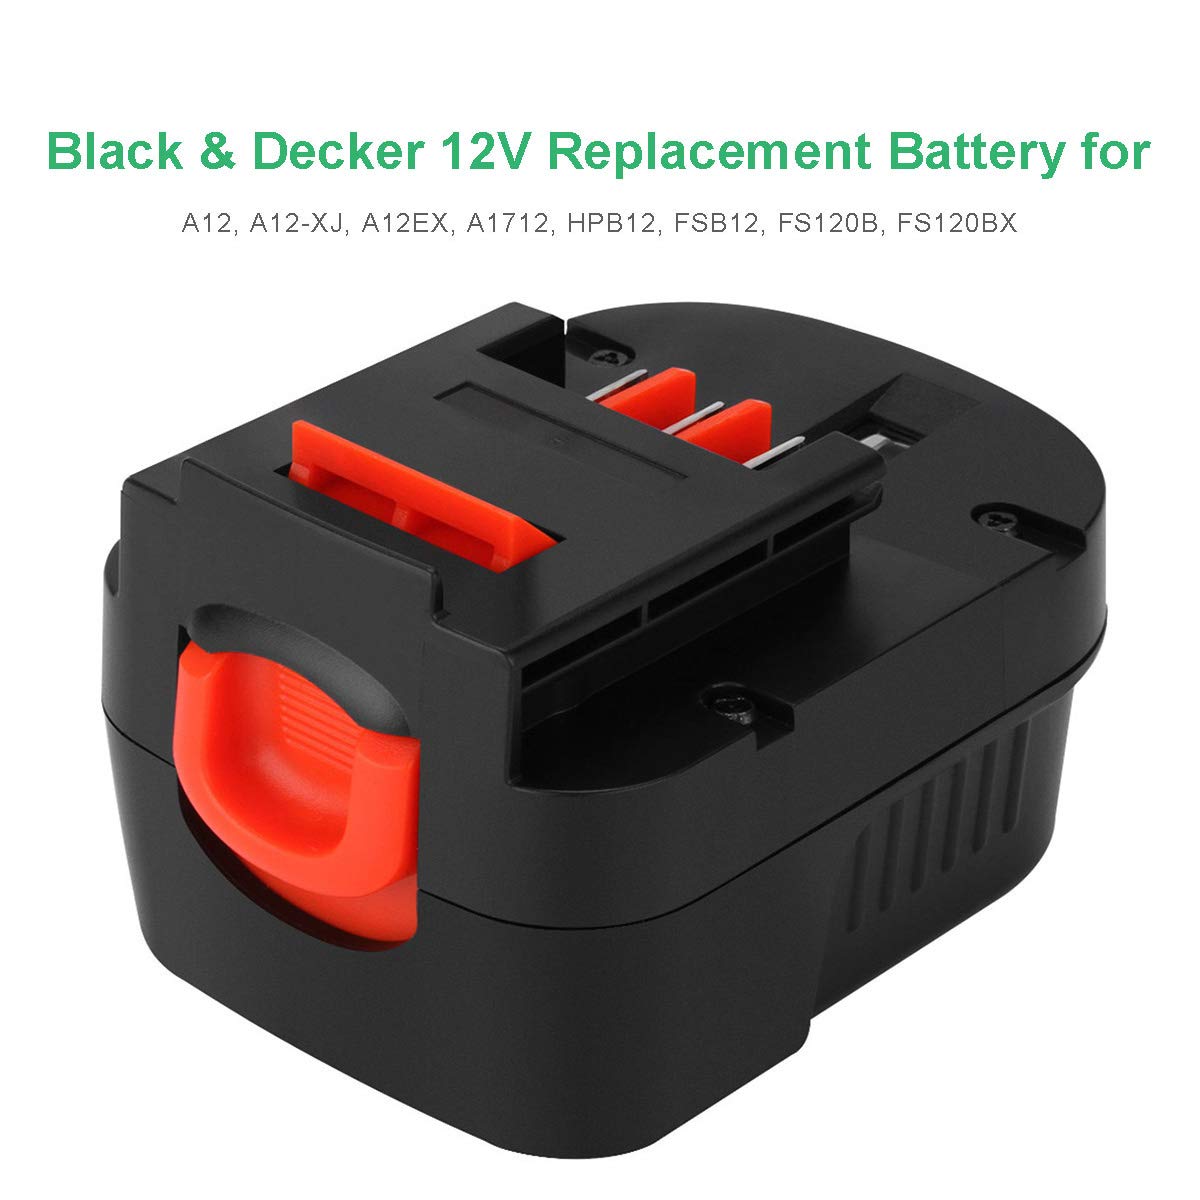 4 Pack Upgraded 12V 4800mAh Replacement for Black and Decker HBP12 NI-MH Battery | A1712 FS120B FSB12 HPB12 A12 A12-XJ A12EX FS120B FSB12 FS120BX Battery